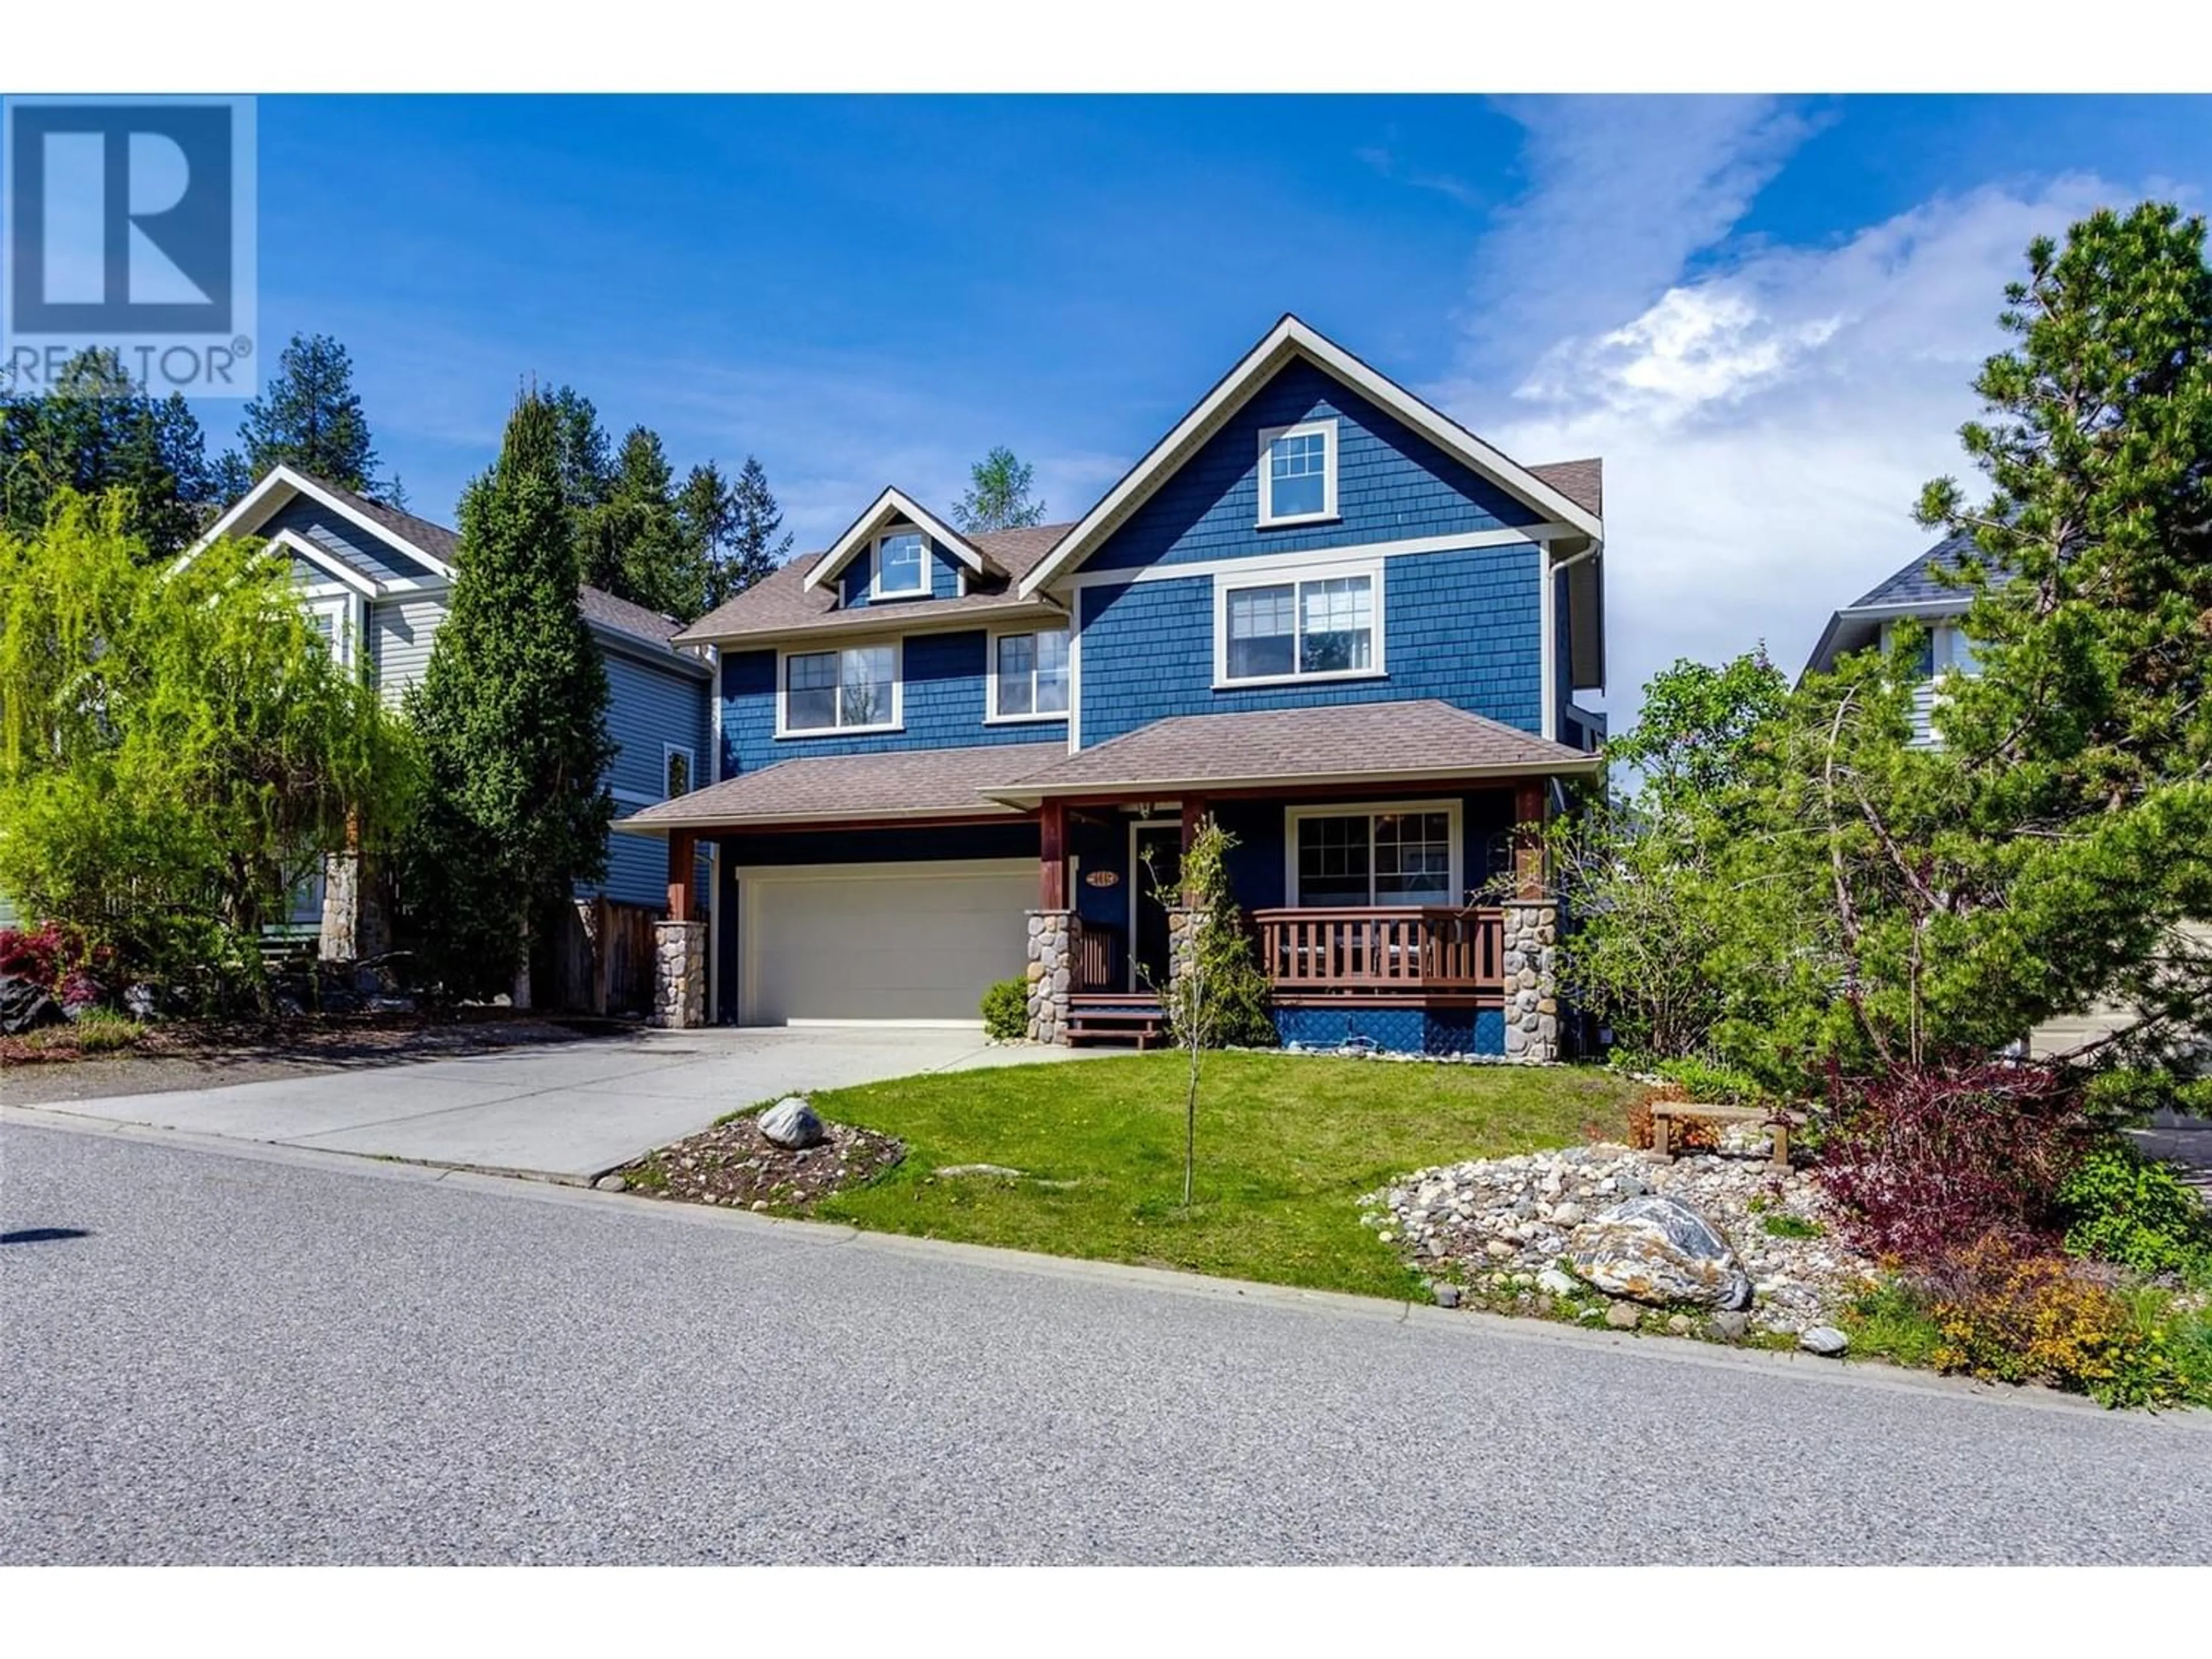 Frontside or backside of a home for 1119 Paret Crescent, Kelowna British Columbia V1W4X8